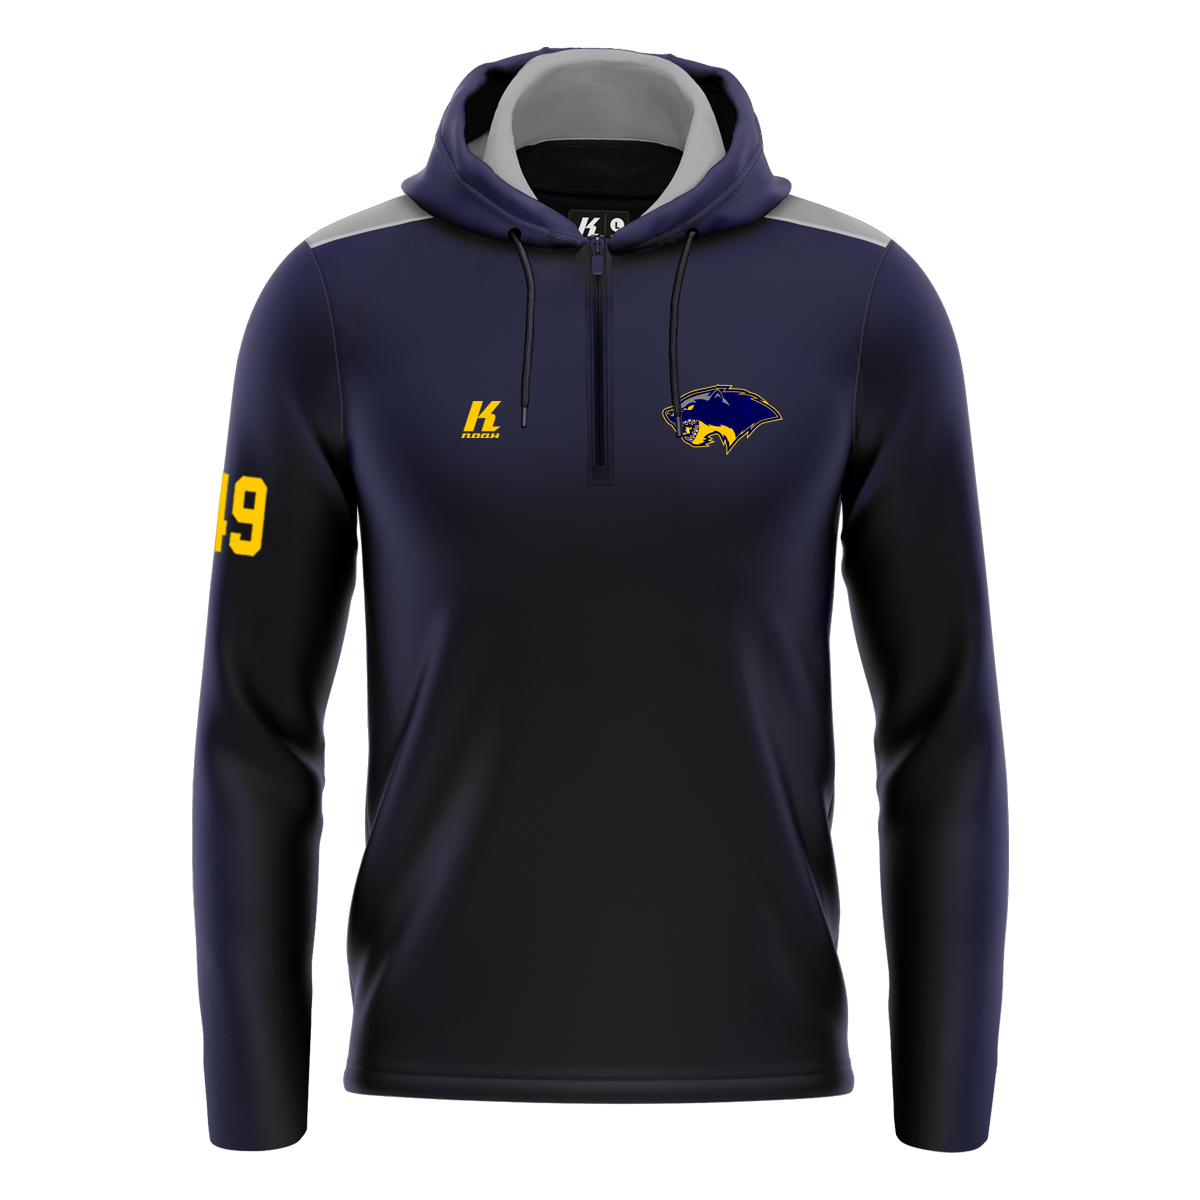 Wolverines K.Tech-Fiber Hoodie “Heritage” with Playernumber/Initials